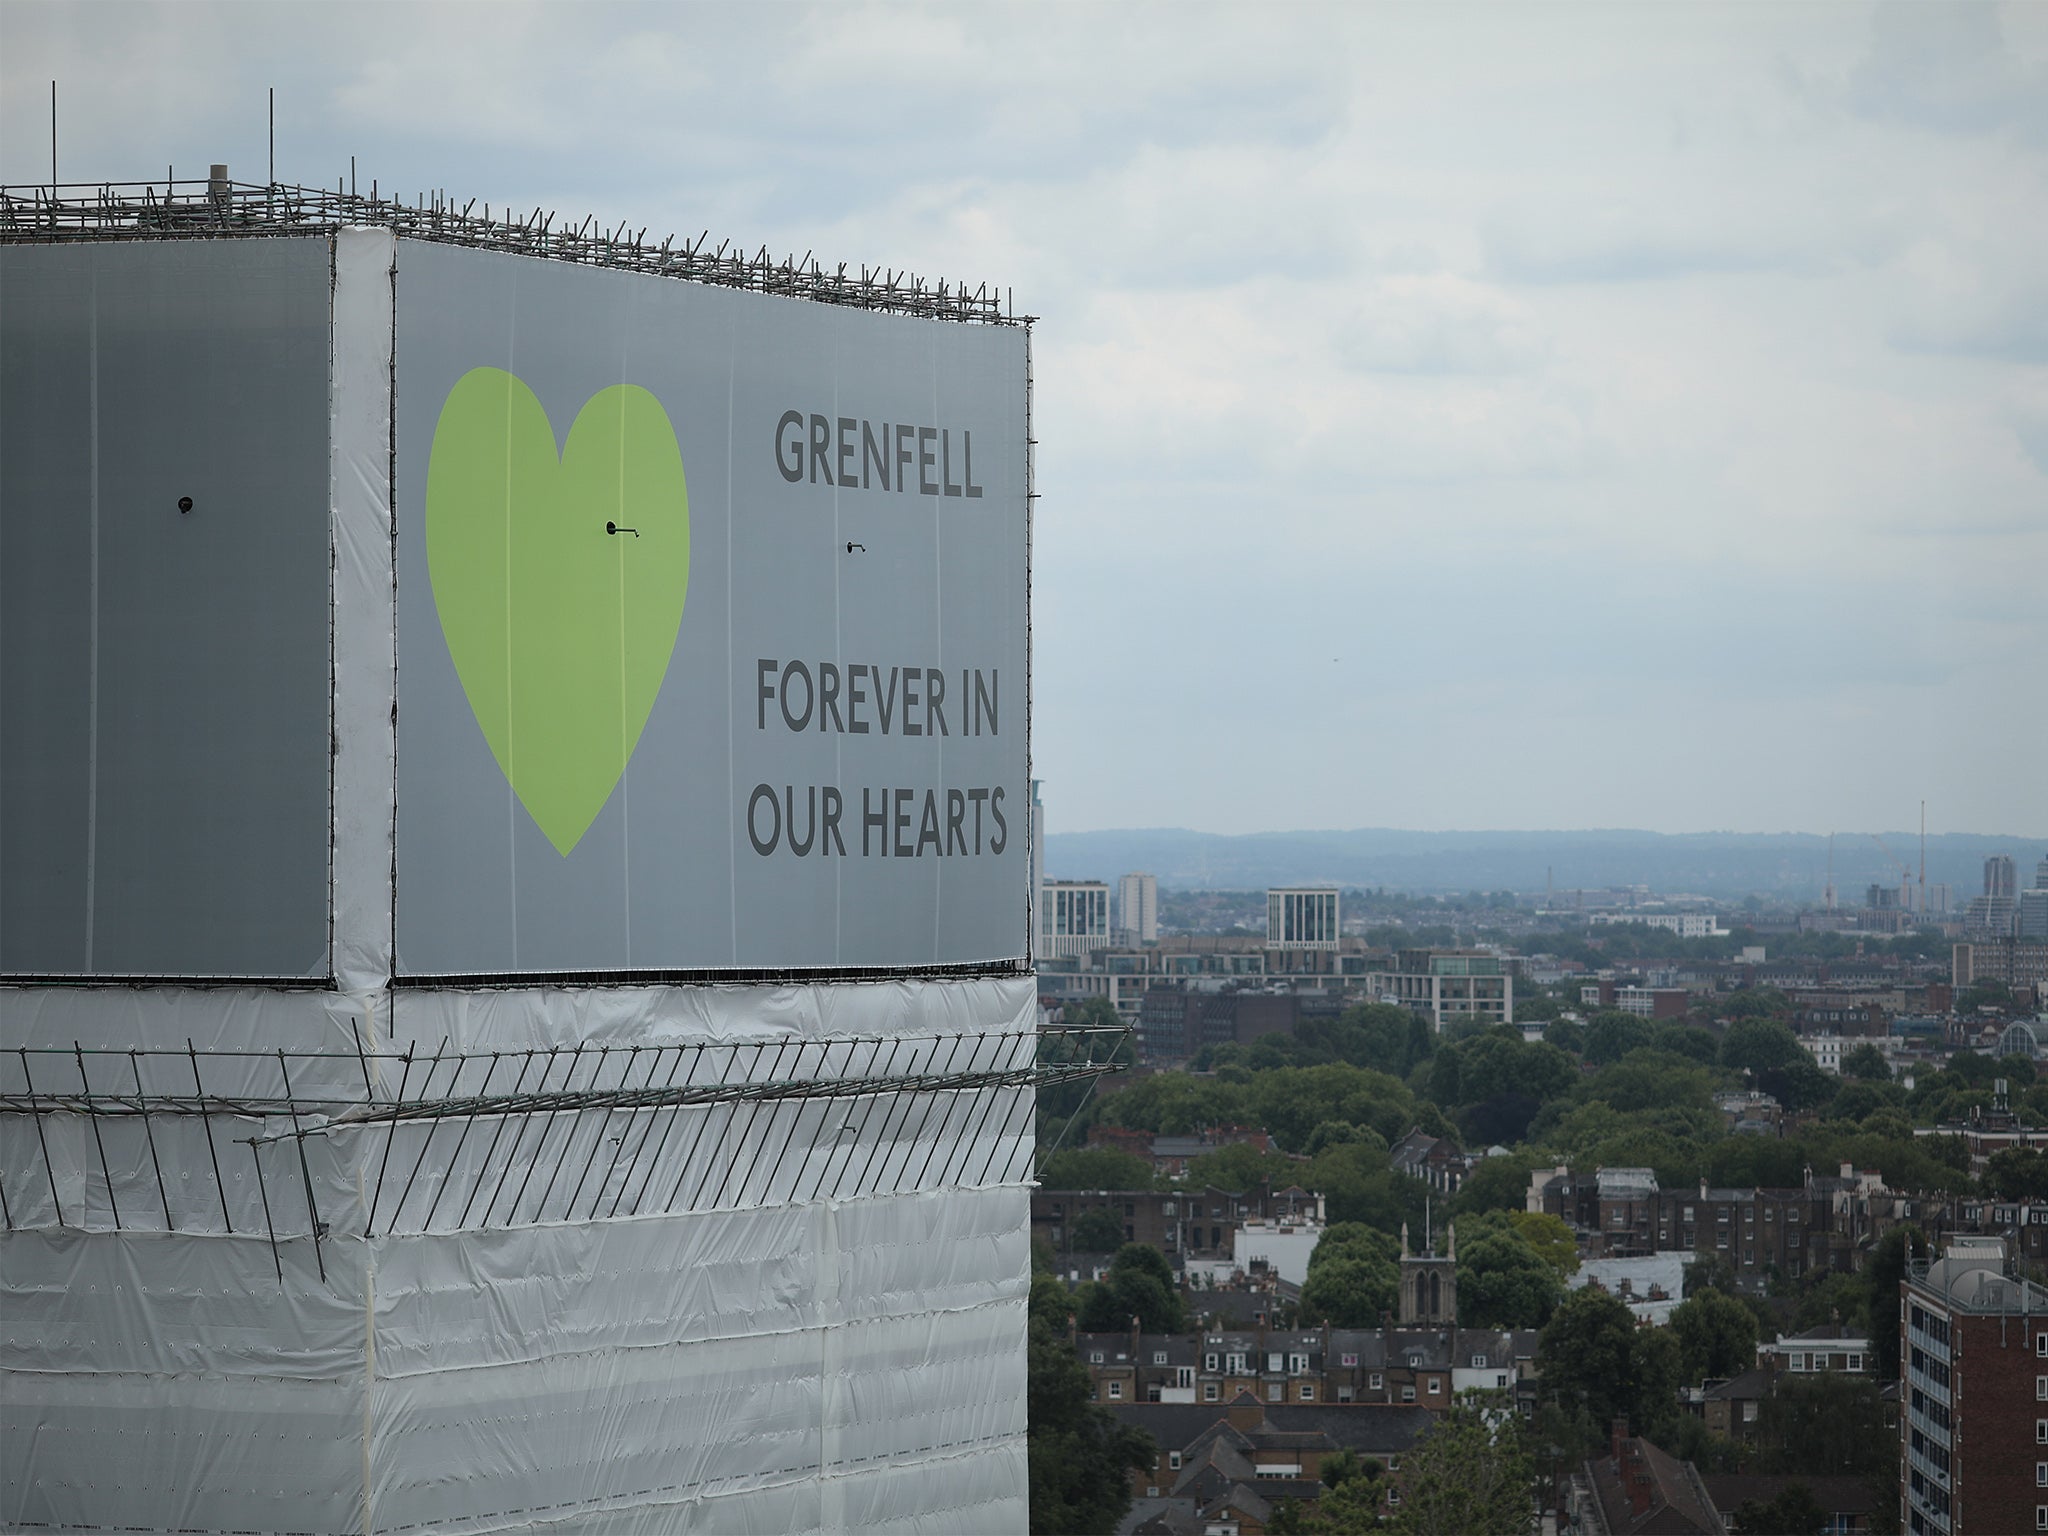 Scores of housing cases remain unresolved in the 18 months since the Grenfell Tower fire